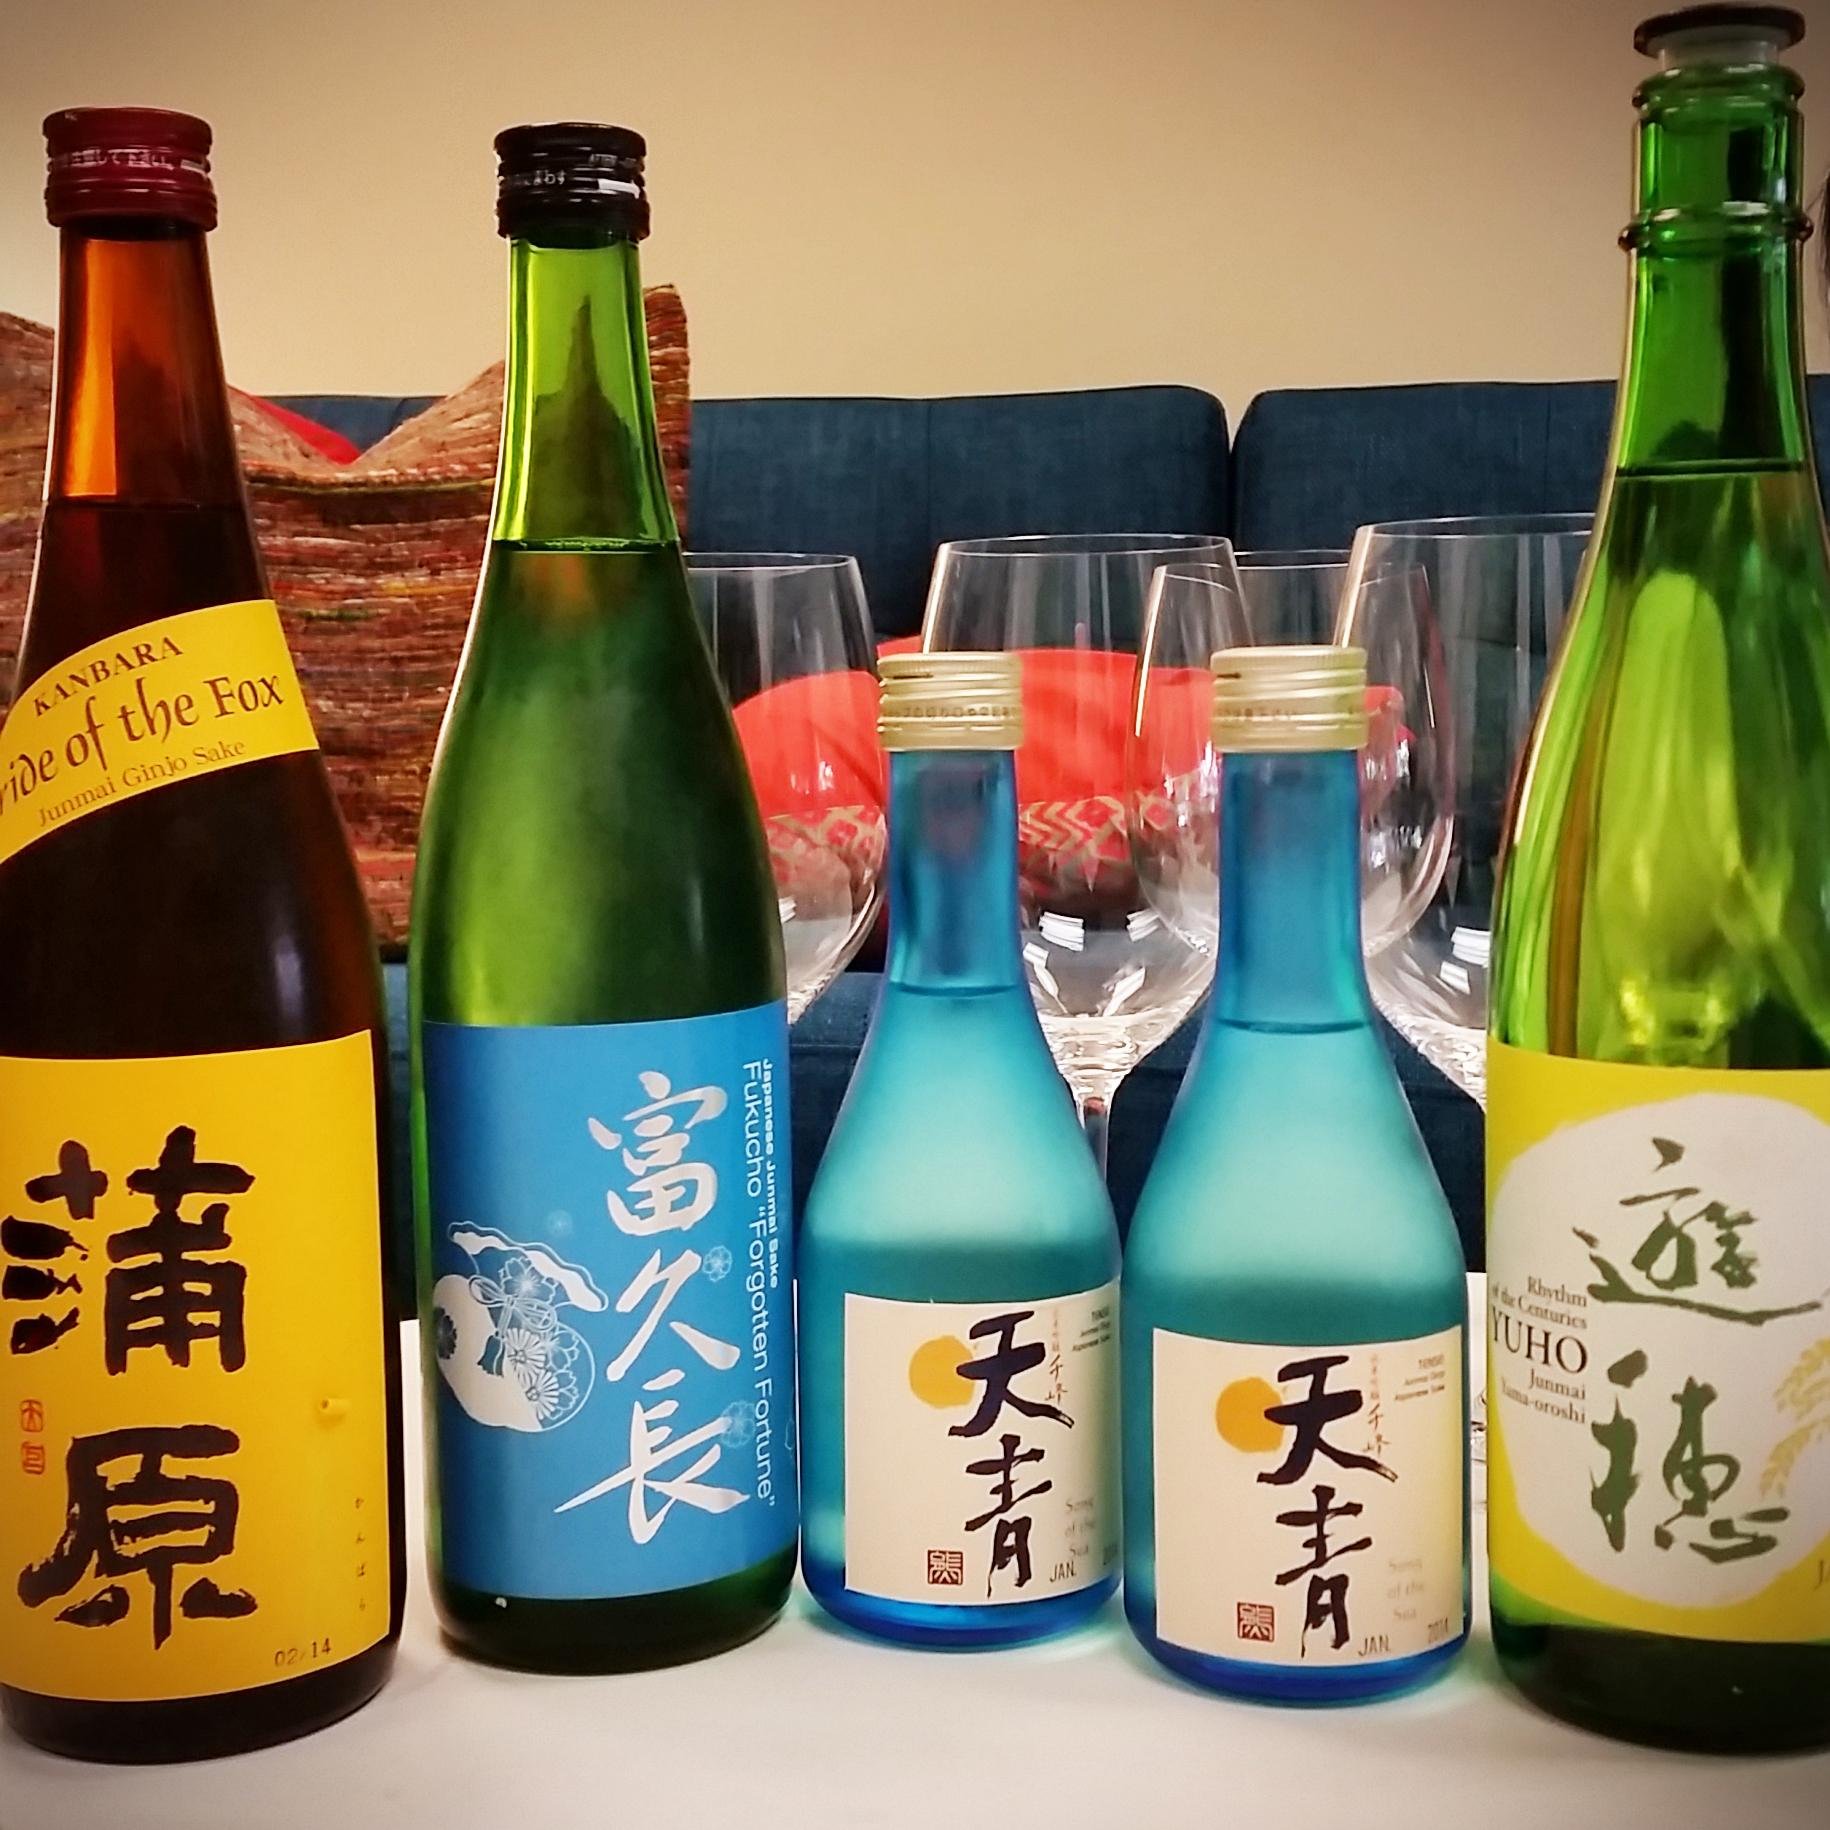 Vine Connections is a leading importer of premium Japanese sake from family-run brewers. Like us on Facebook http://t.co/7ARO0ejkpa